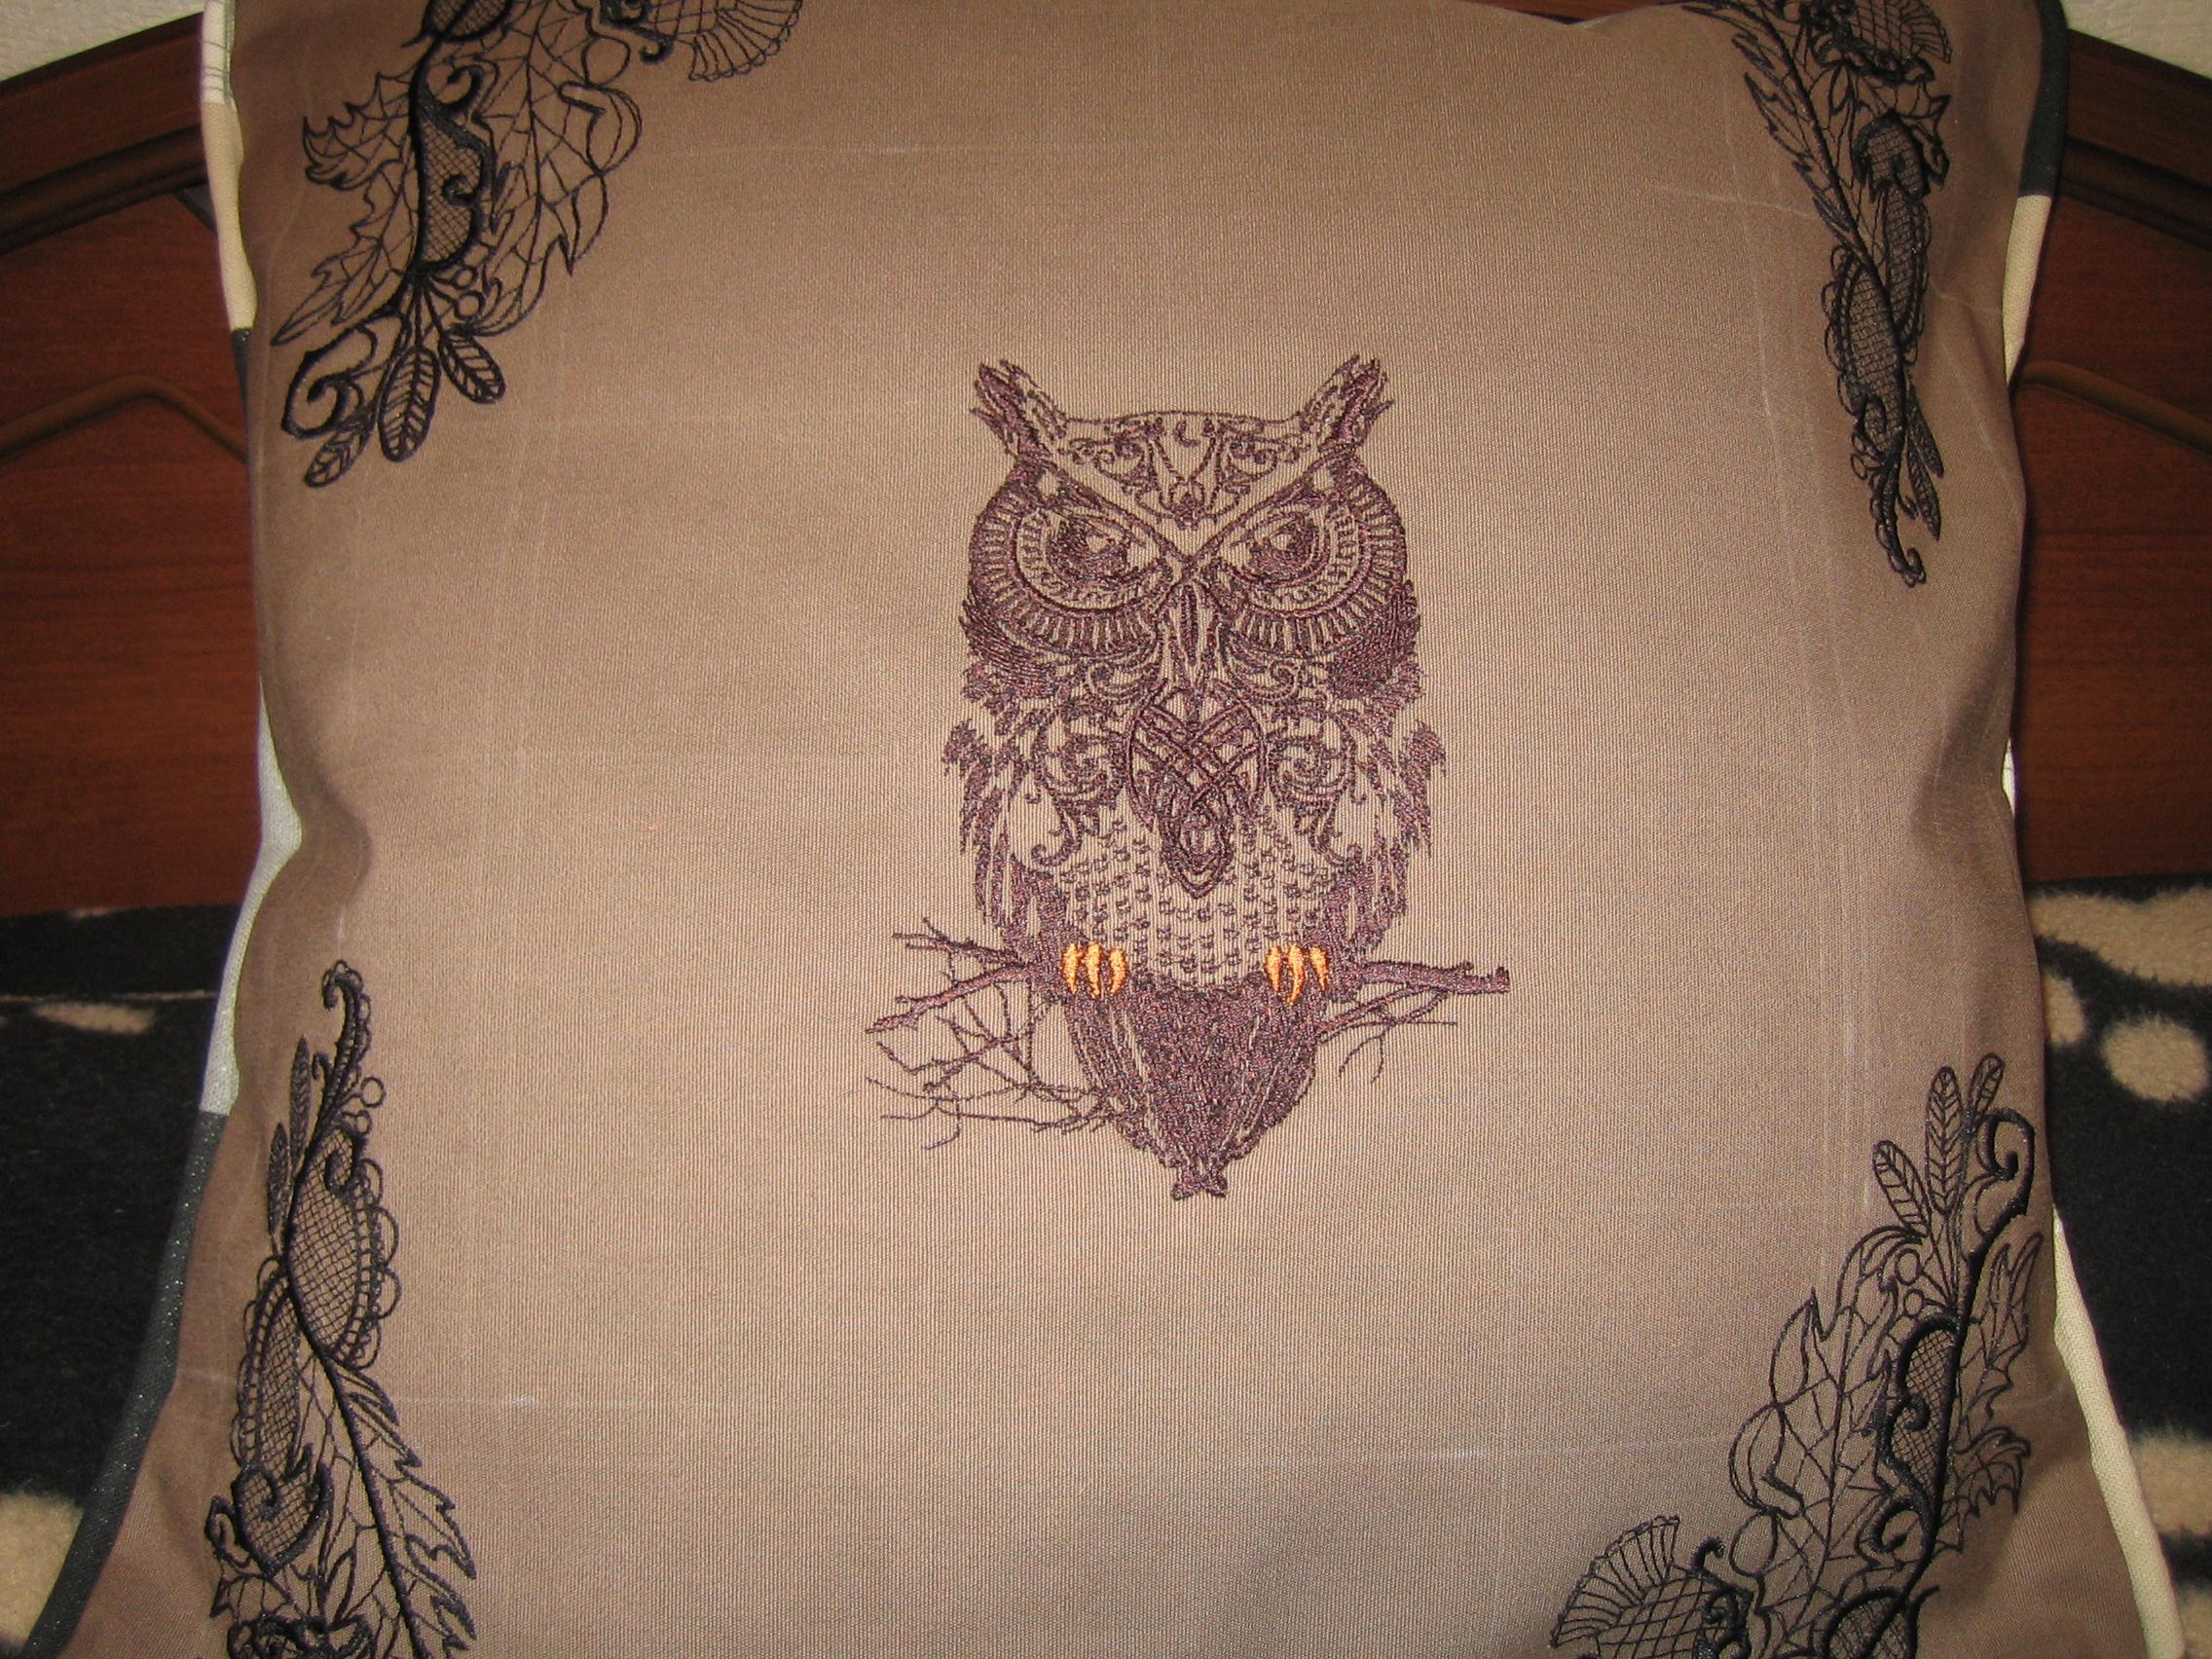 Cushion with Tribal owl embroidery design